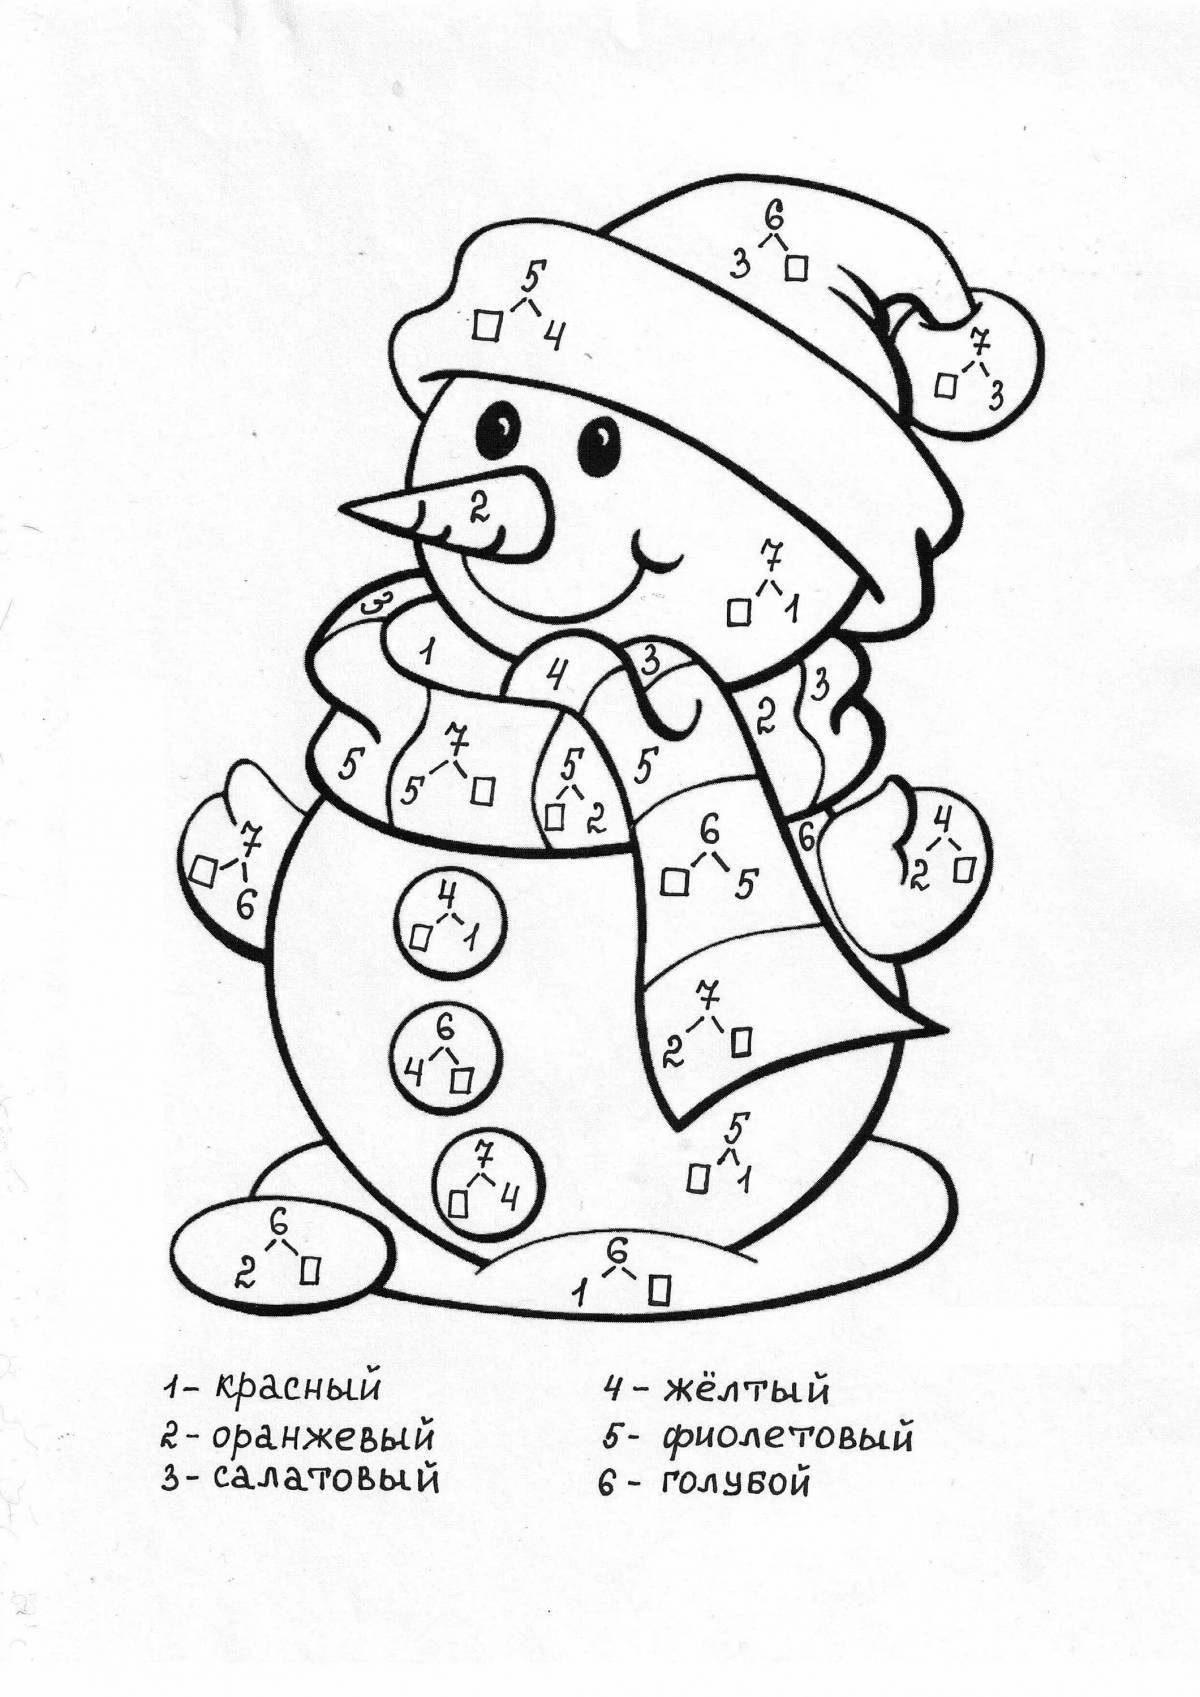 Exotic snowman coloring by numbers